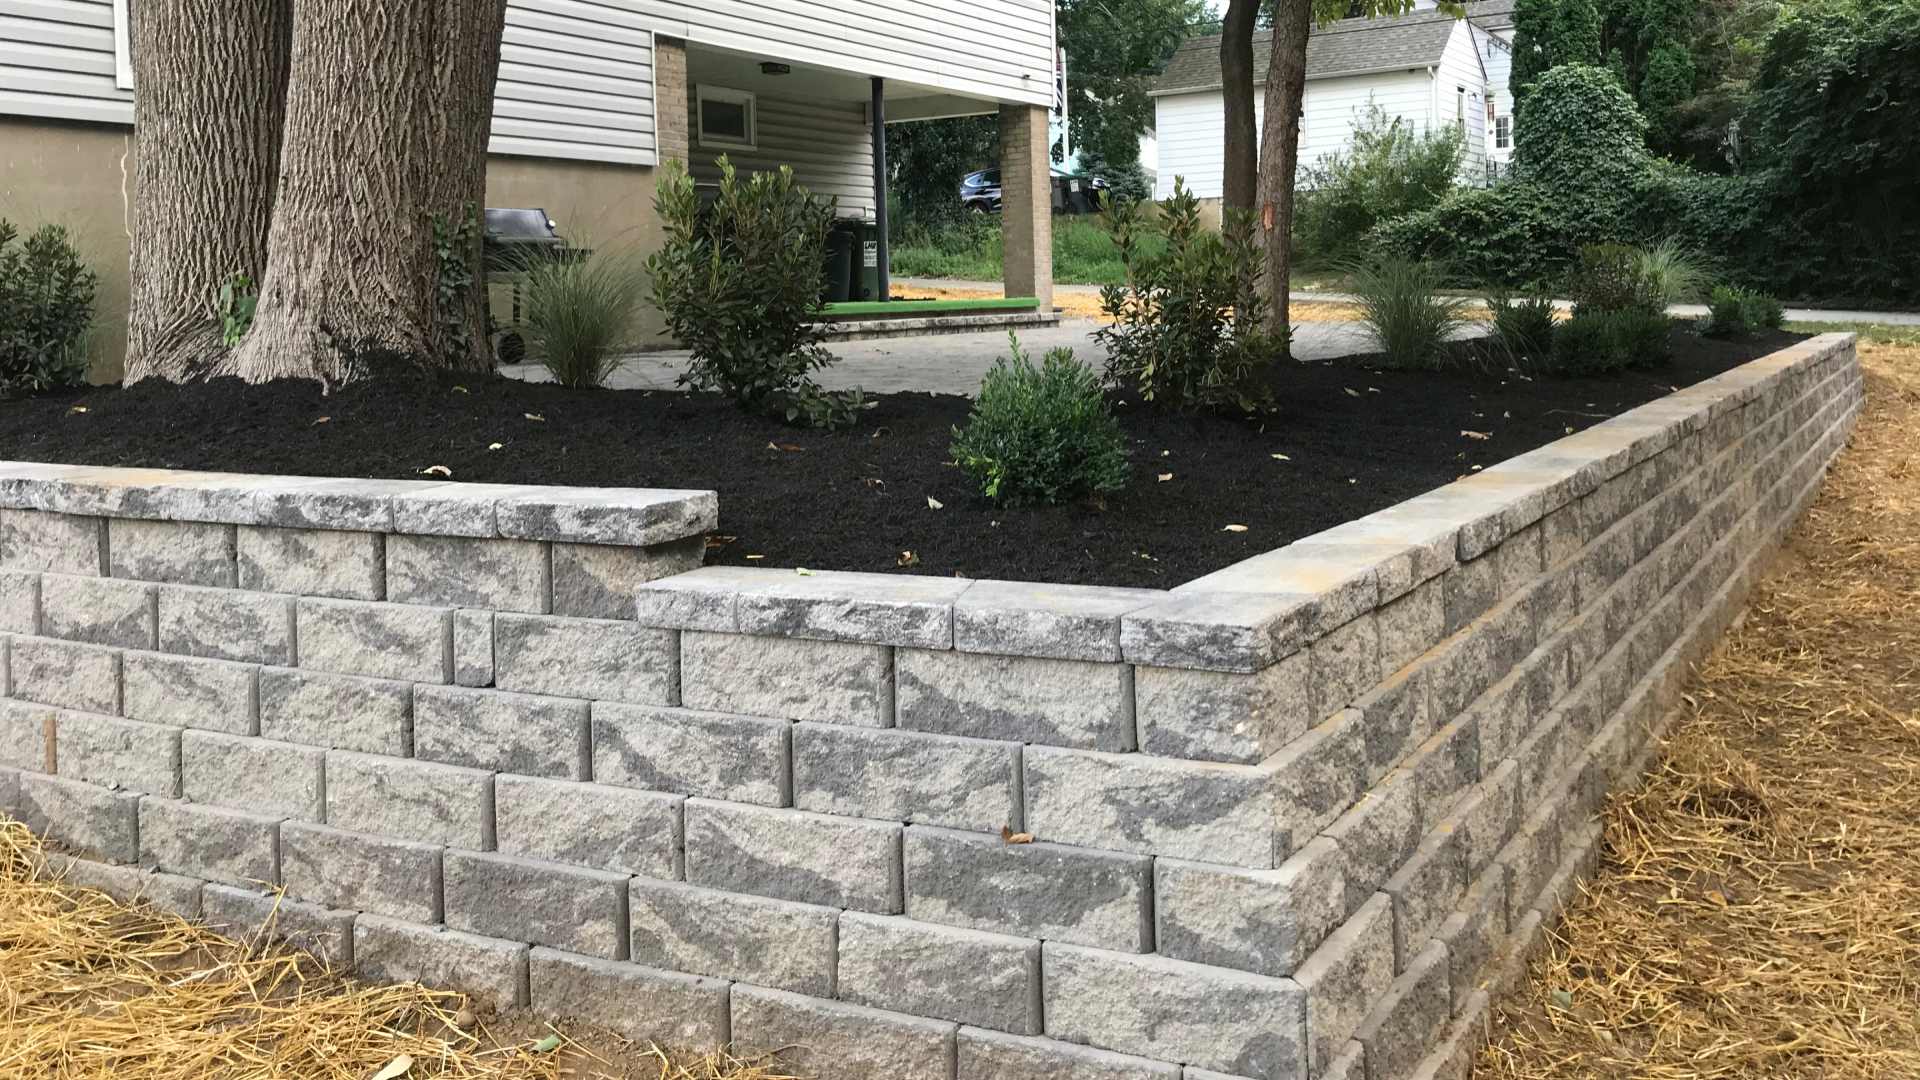 Retaining wall built out of stone pavers for landscape bed in Nazareth, PA.